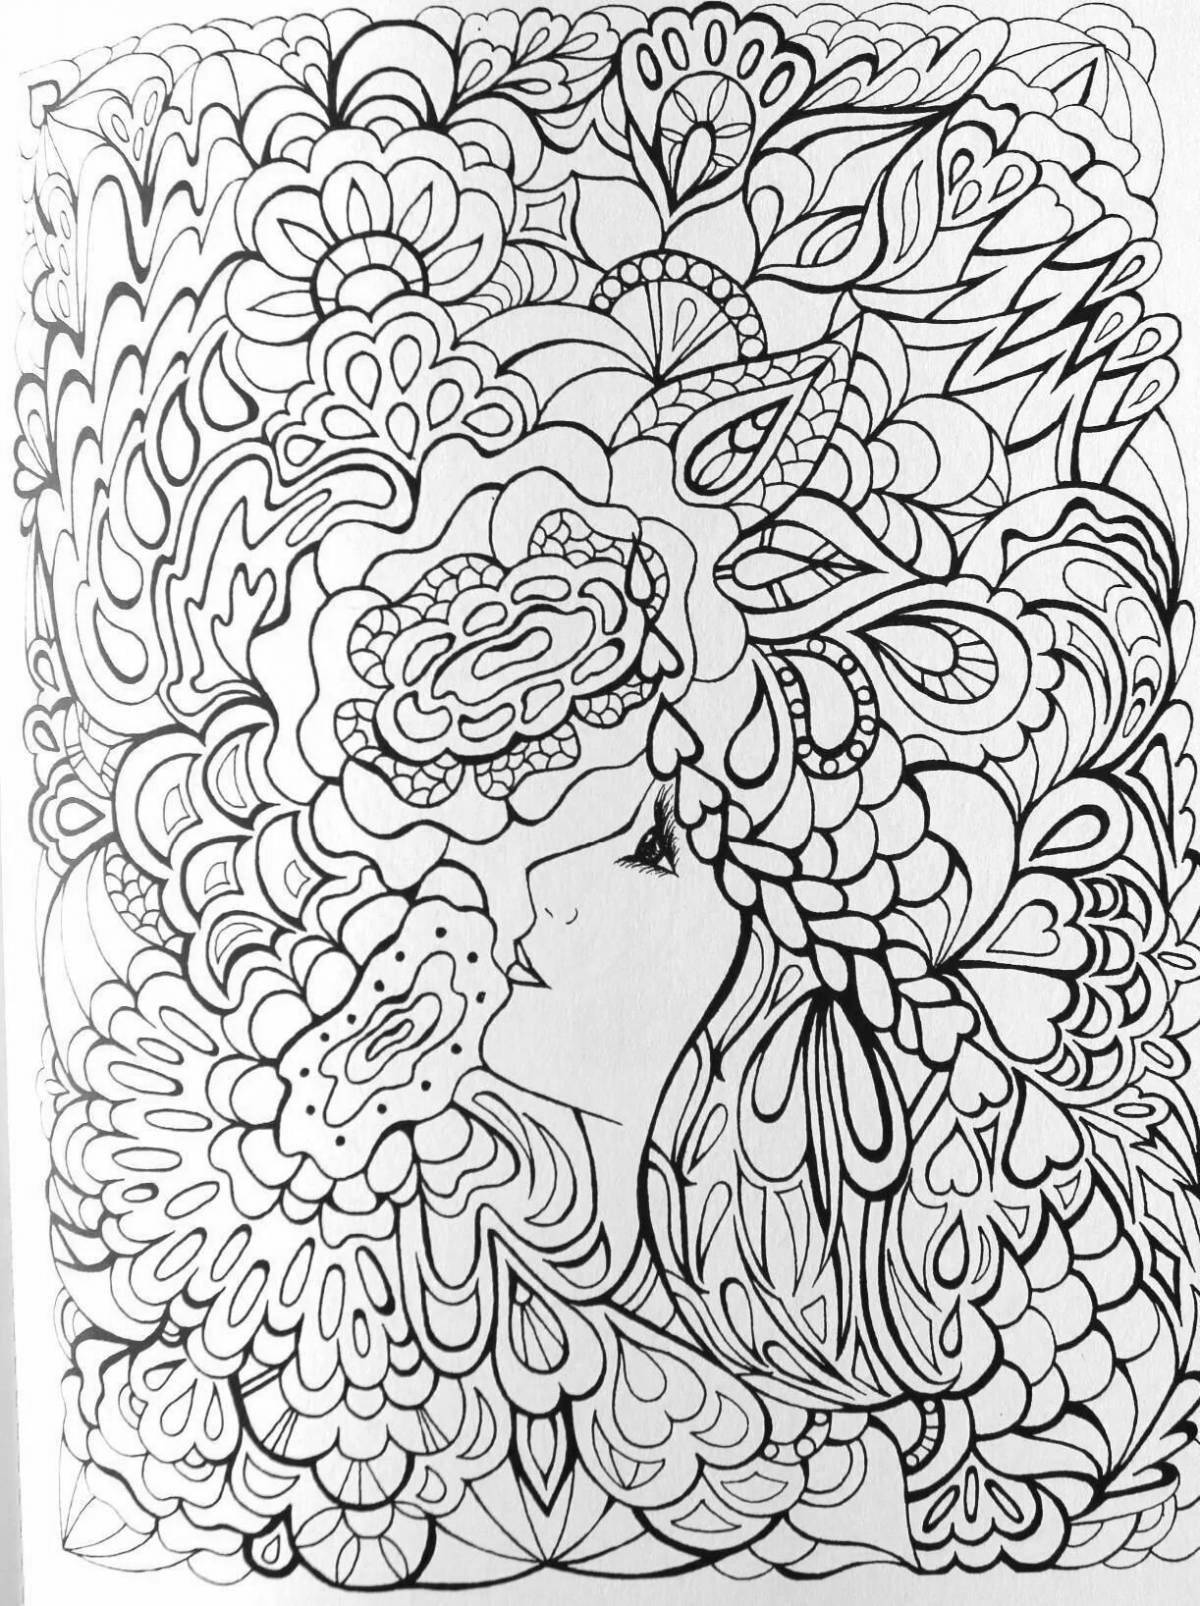 Exciting coloring anti-stress art therapy